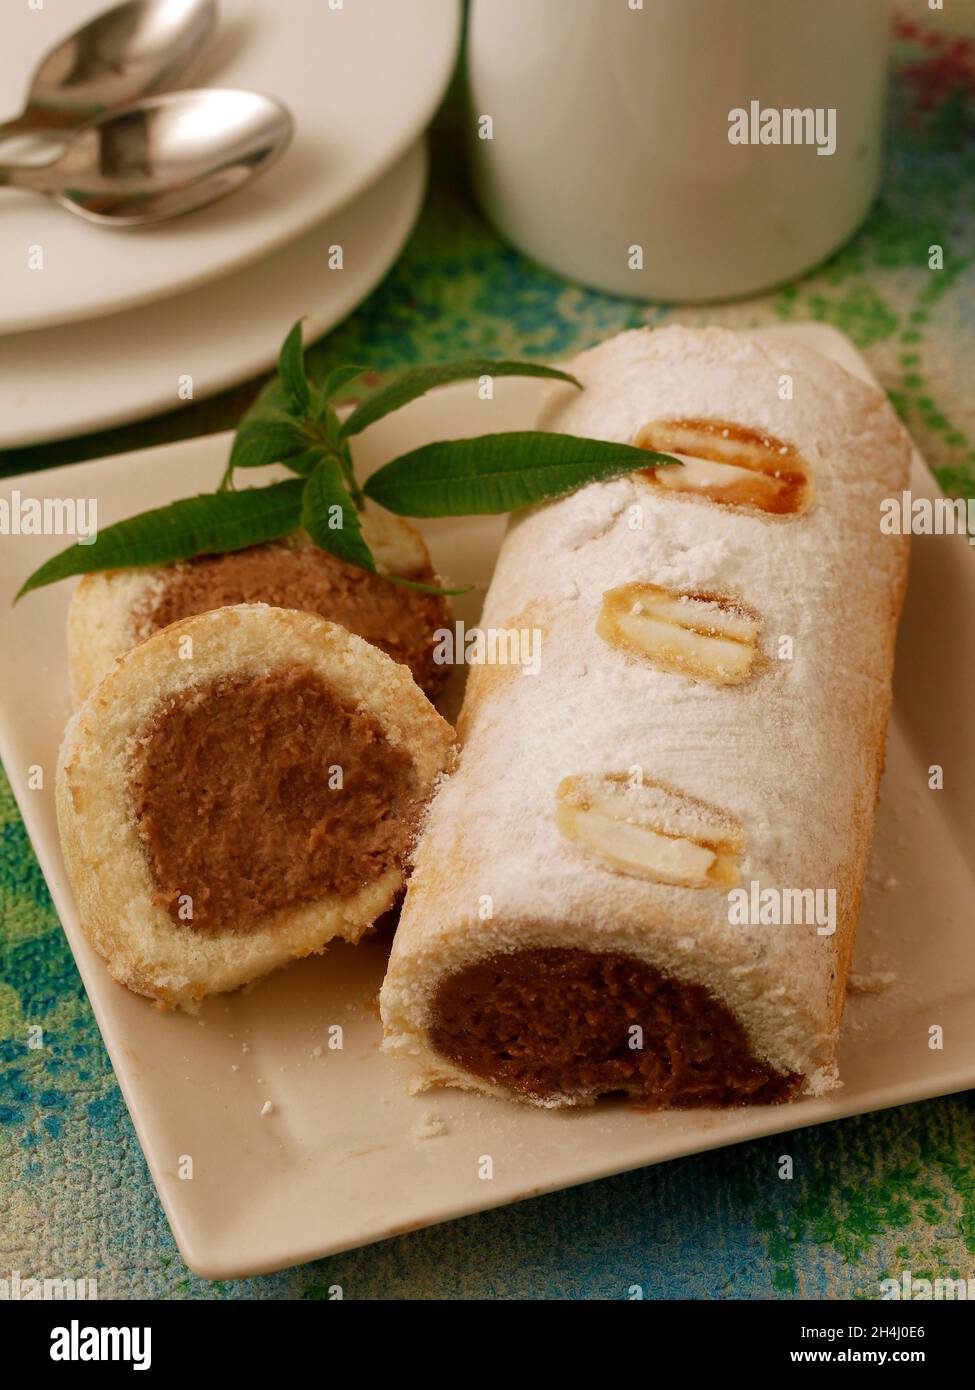 Swiss roll filled with chocolate. Stock Photo